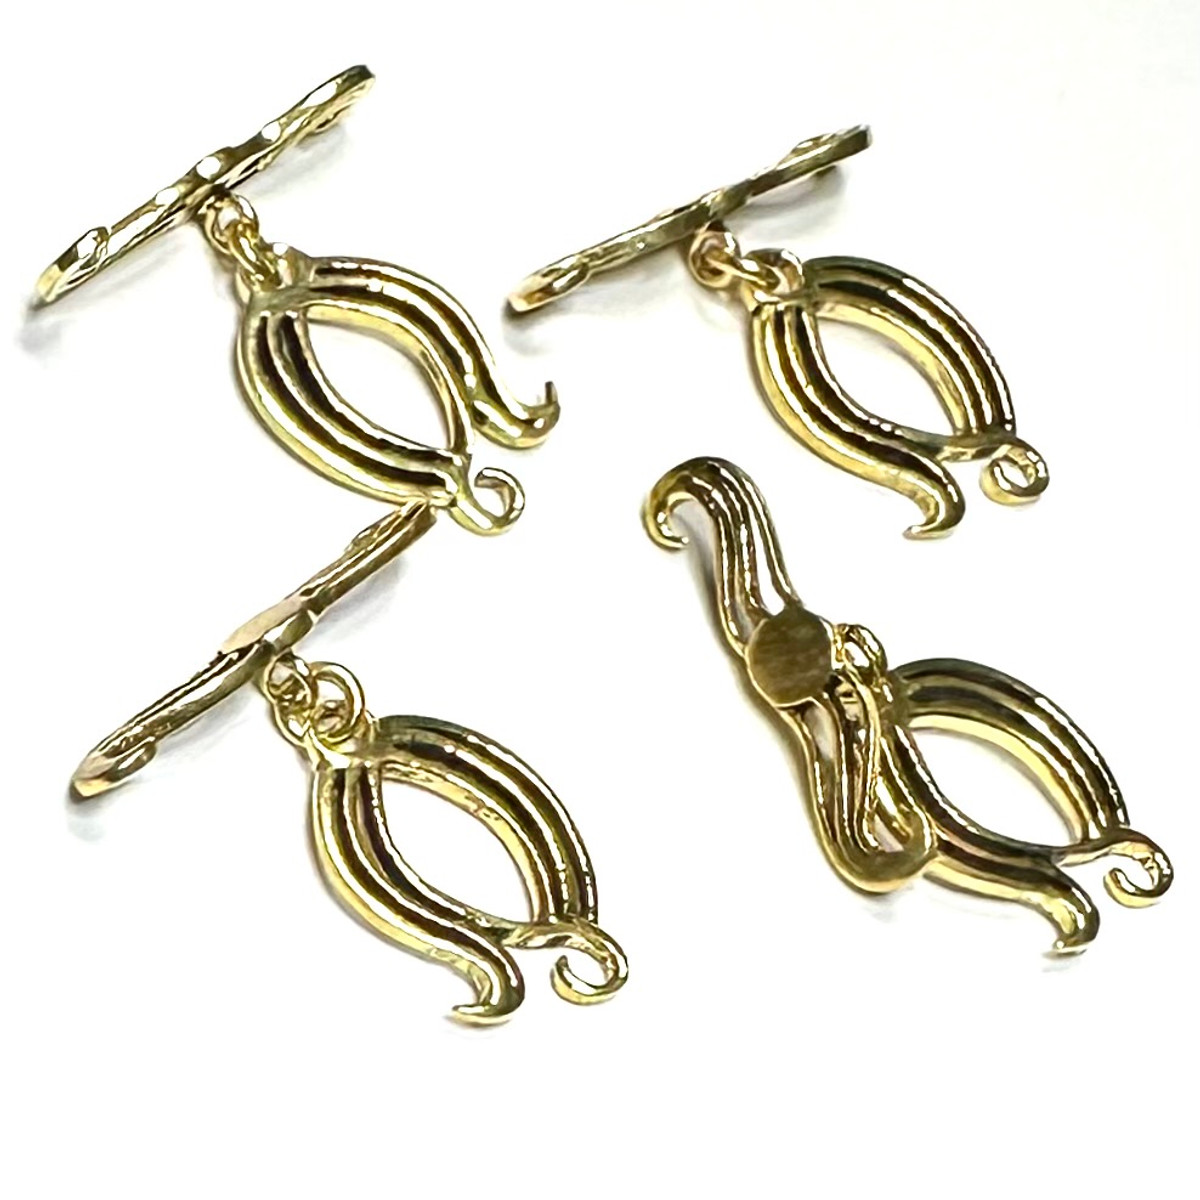 Antiqued Vermeil Squiggly Toggle Clasp Lots-24 x 18mm-SALE7350